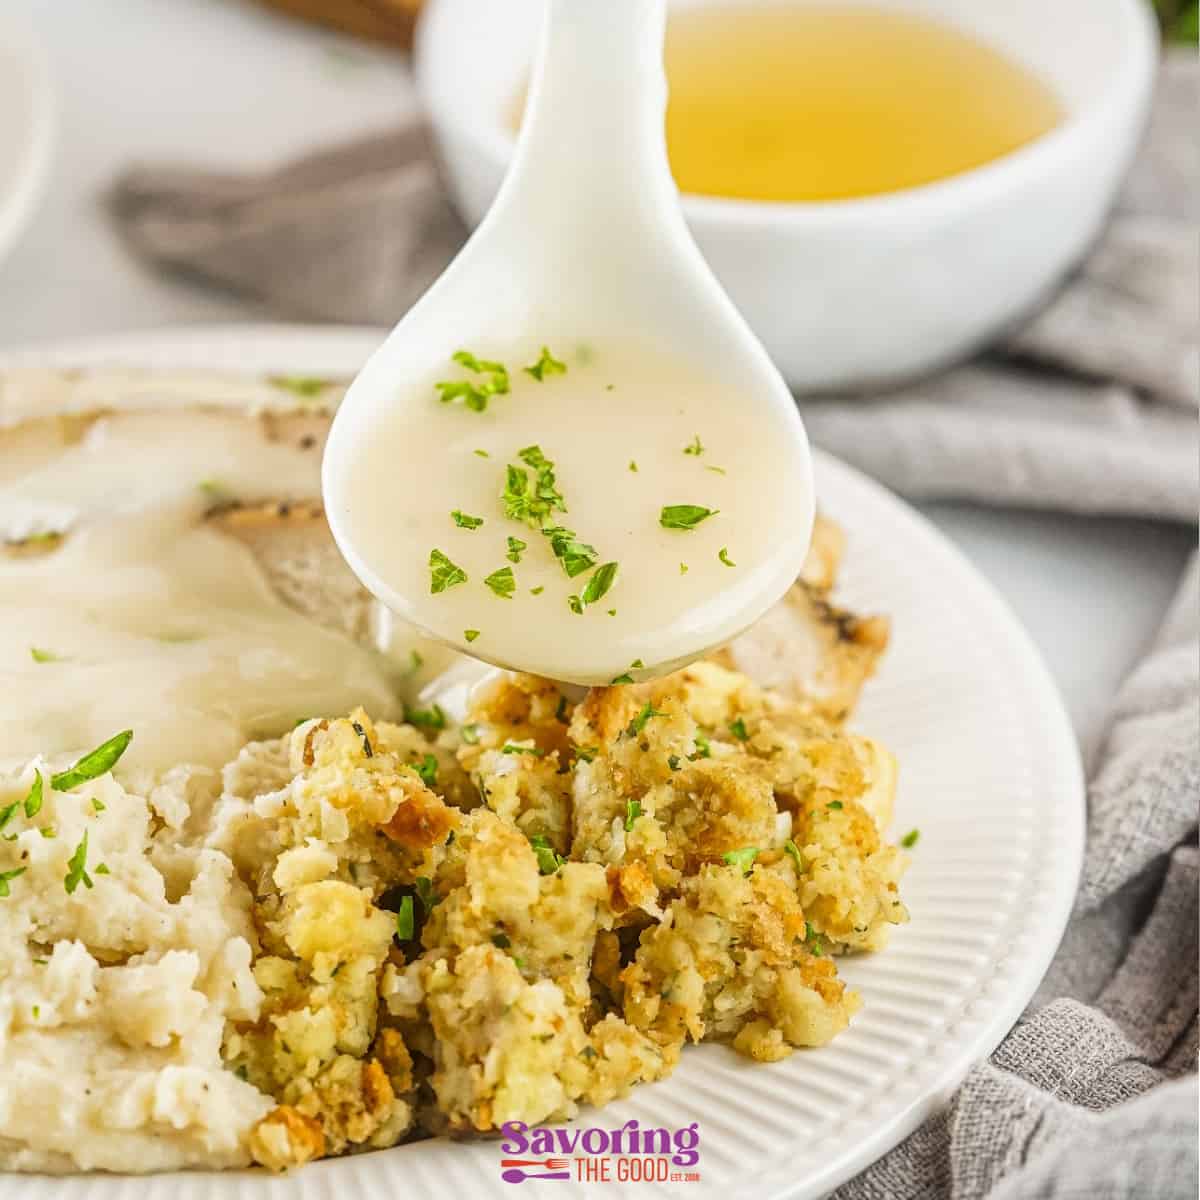 A spoon is pouring turkey gravy with drippings over a plate of mashed potatoes and stuffing.